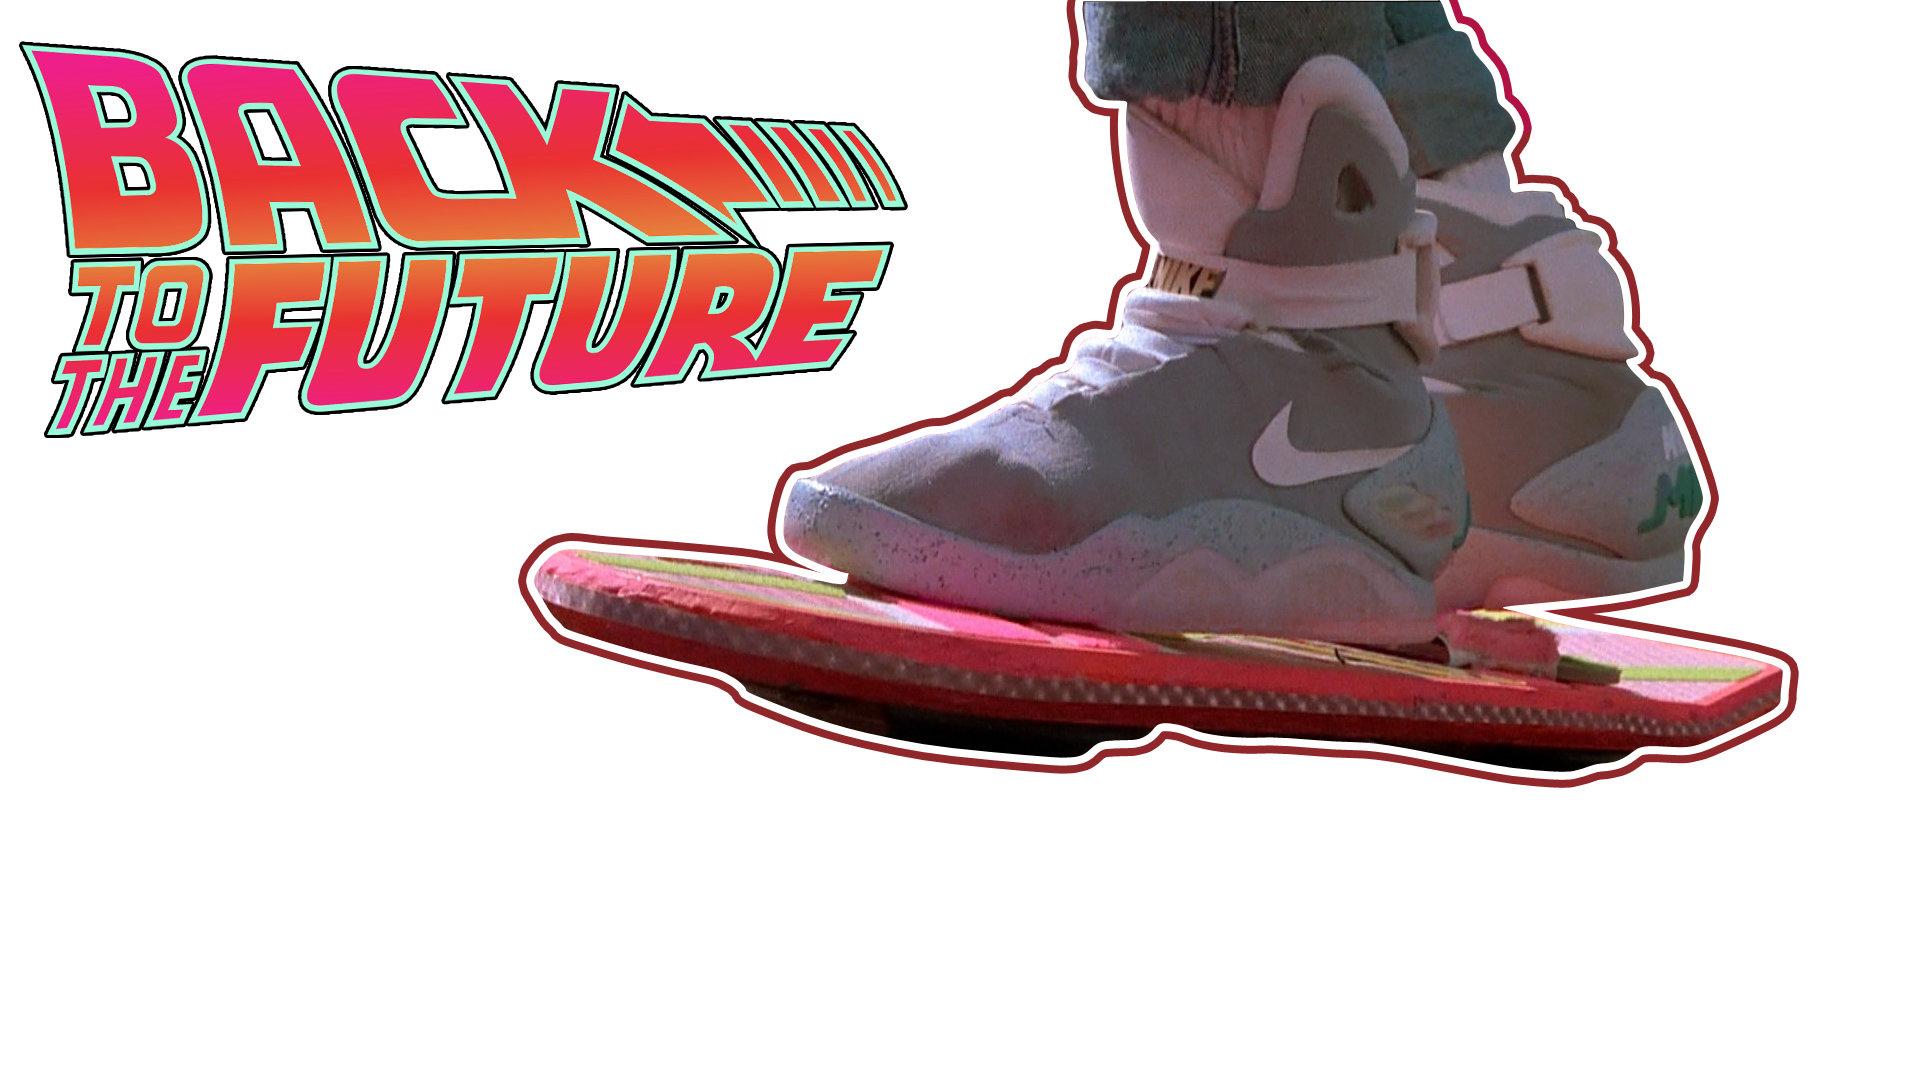 Awesome Back To The Future free wallpaper for full HD PC